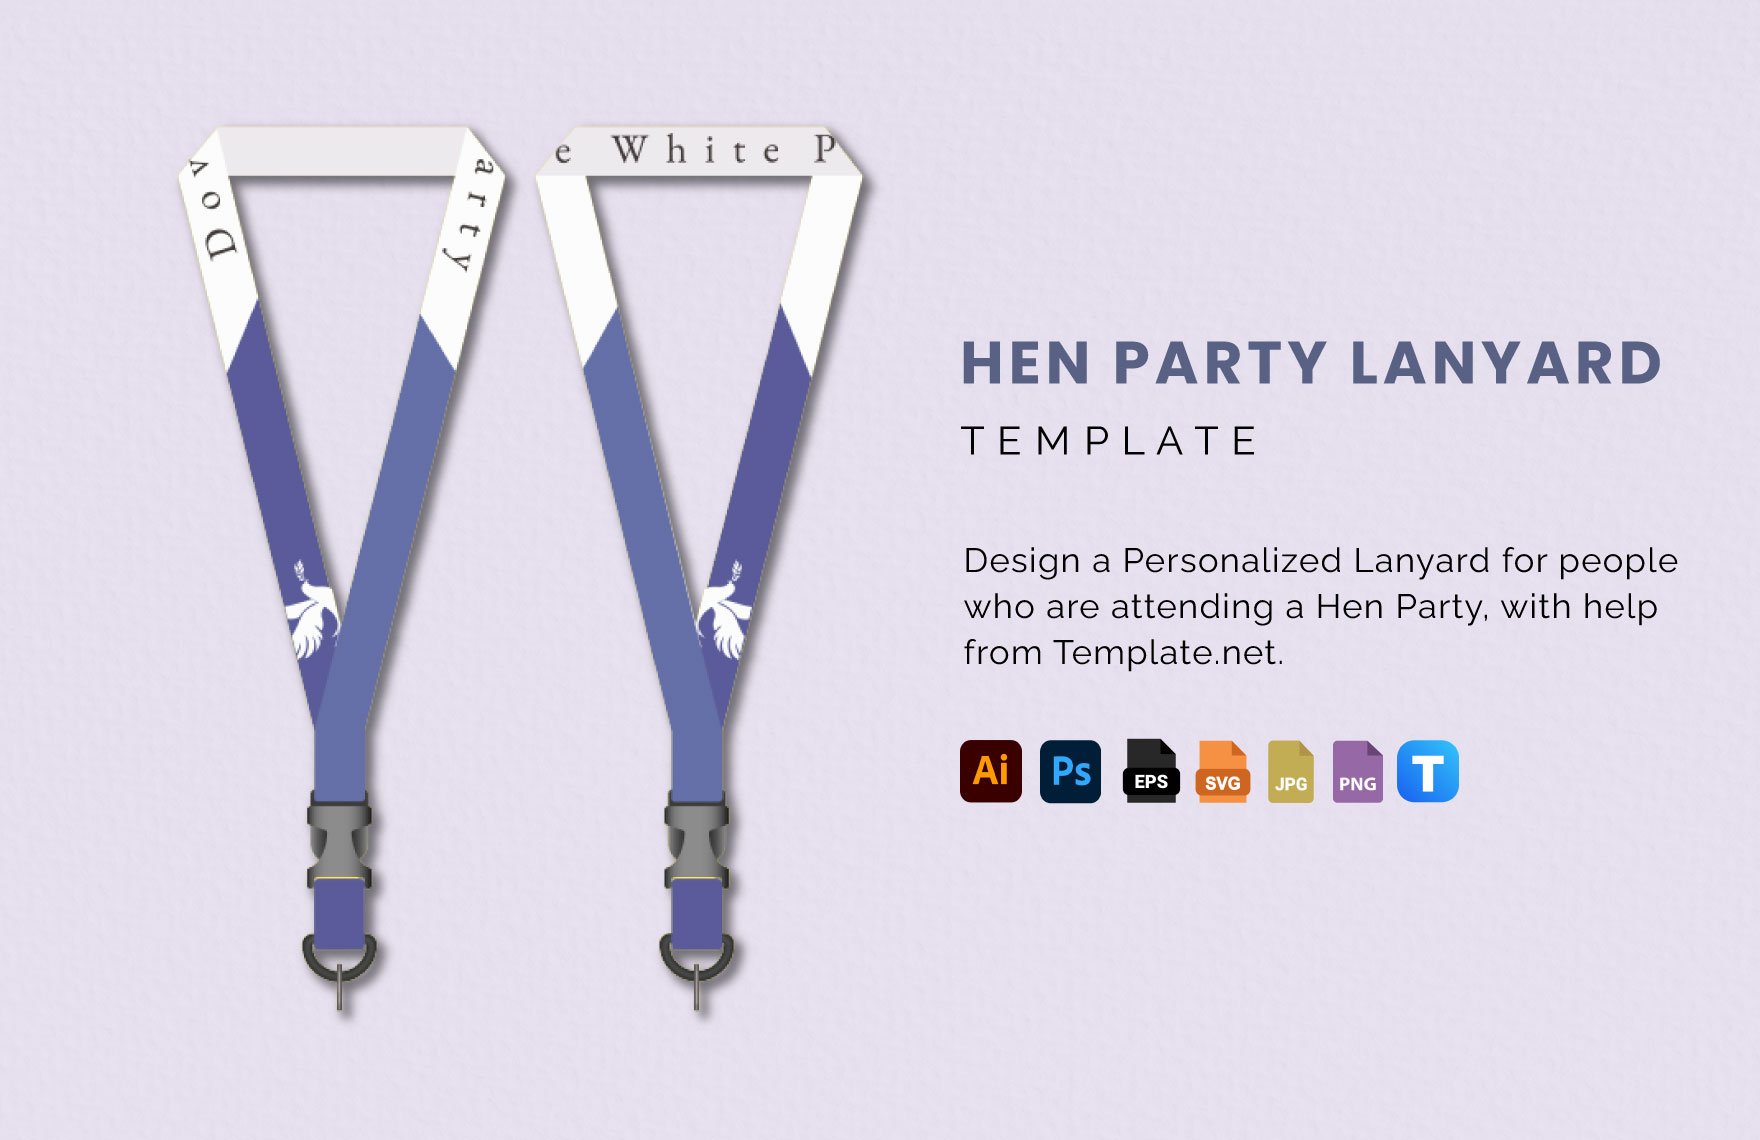 Hen Party Lanyard Template in Illustrator, PSD, EPS, SVG, JPG, PNG